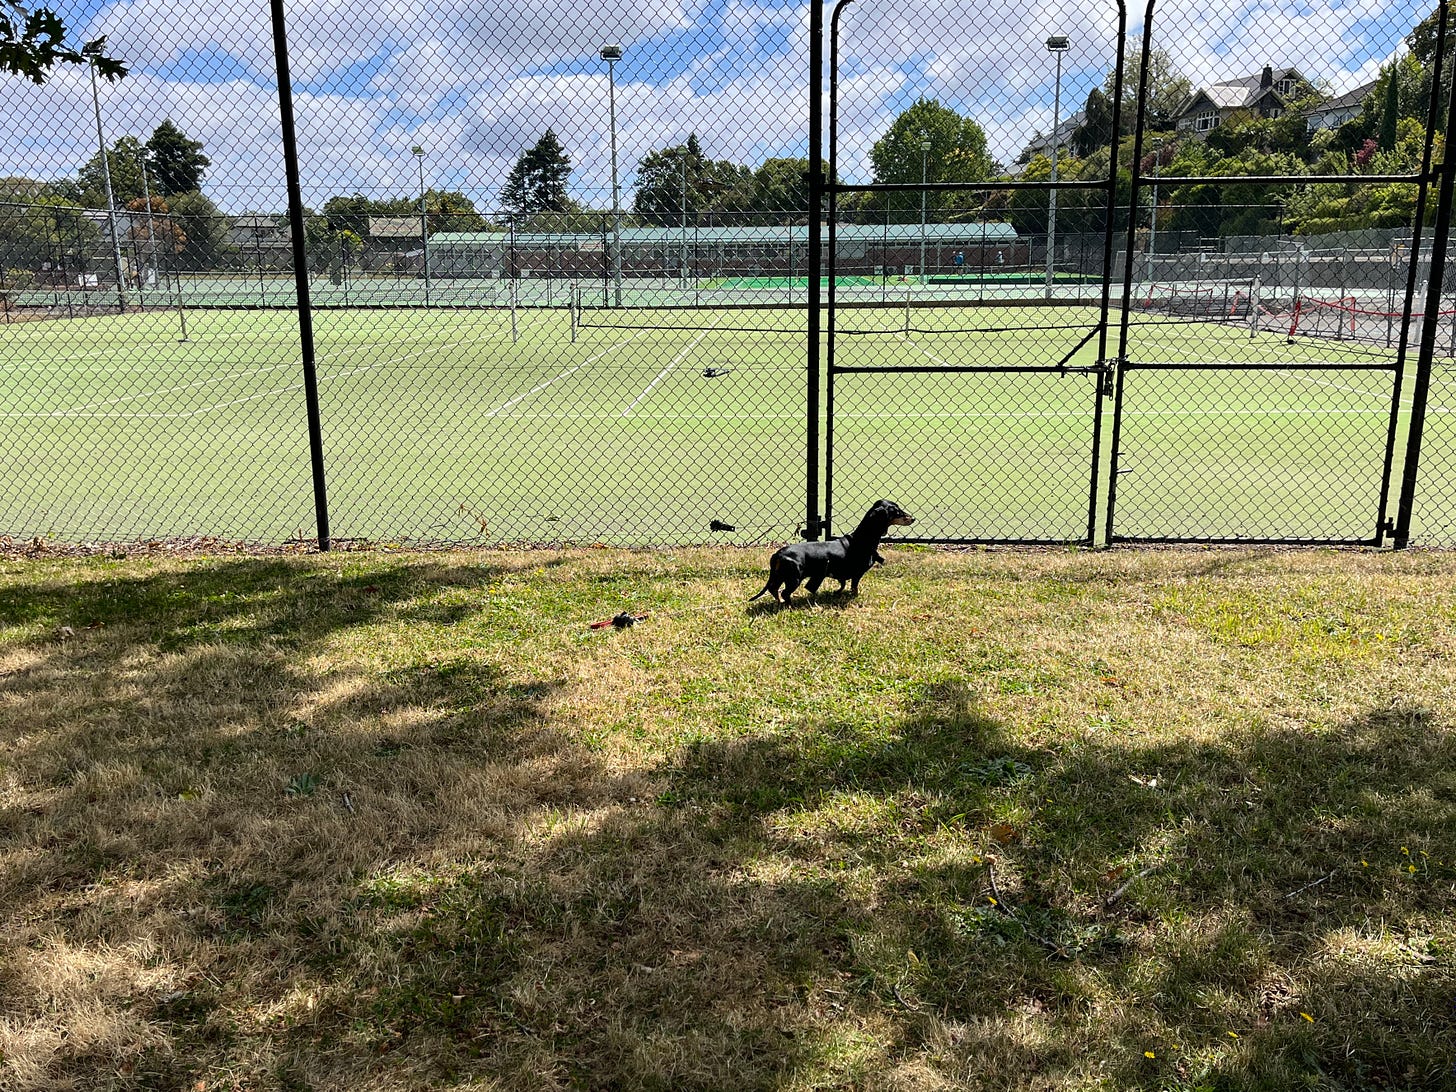 grass at the front, where a small black dachshund stands, then black wire fences looking onto empty tennis courts